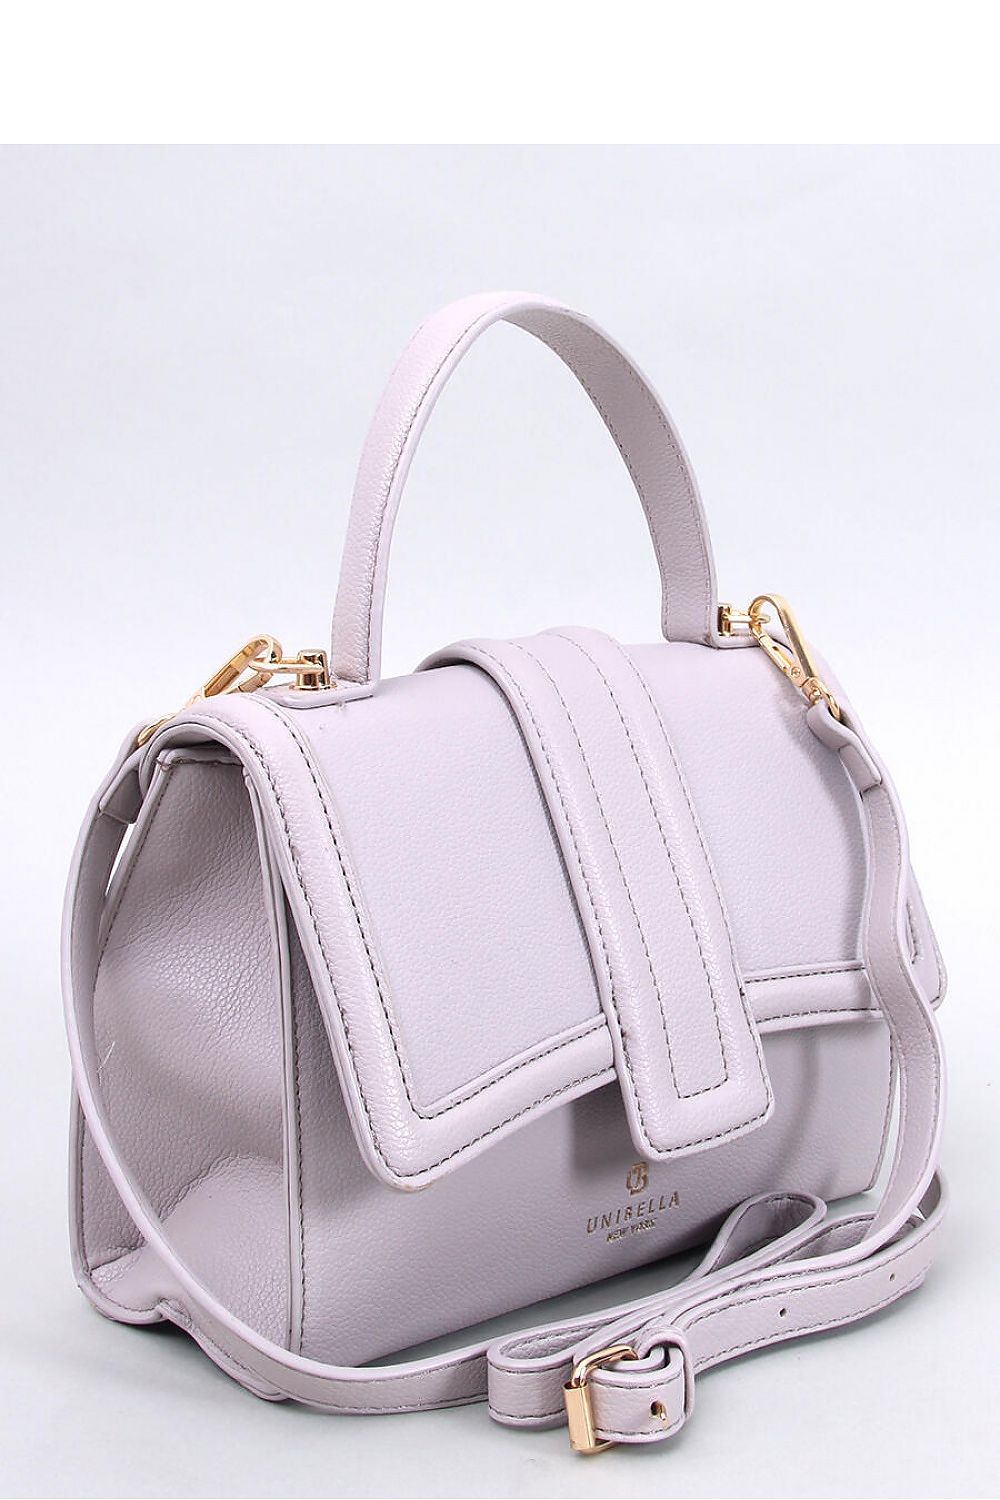 Inello Classic Pale Pink Trunk Handbag - Timeless Elegance with Two-Way Carriage